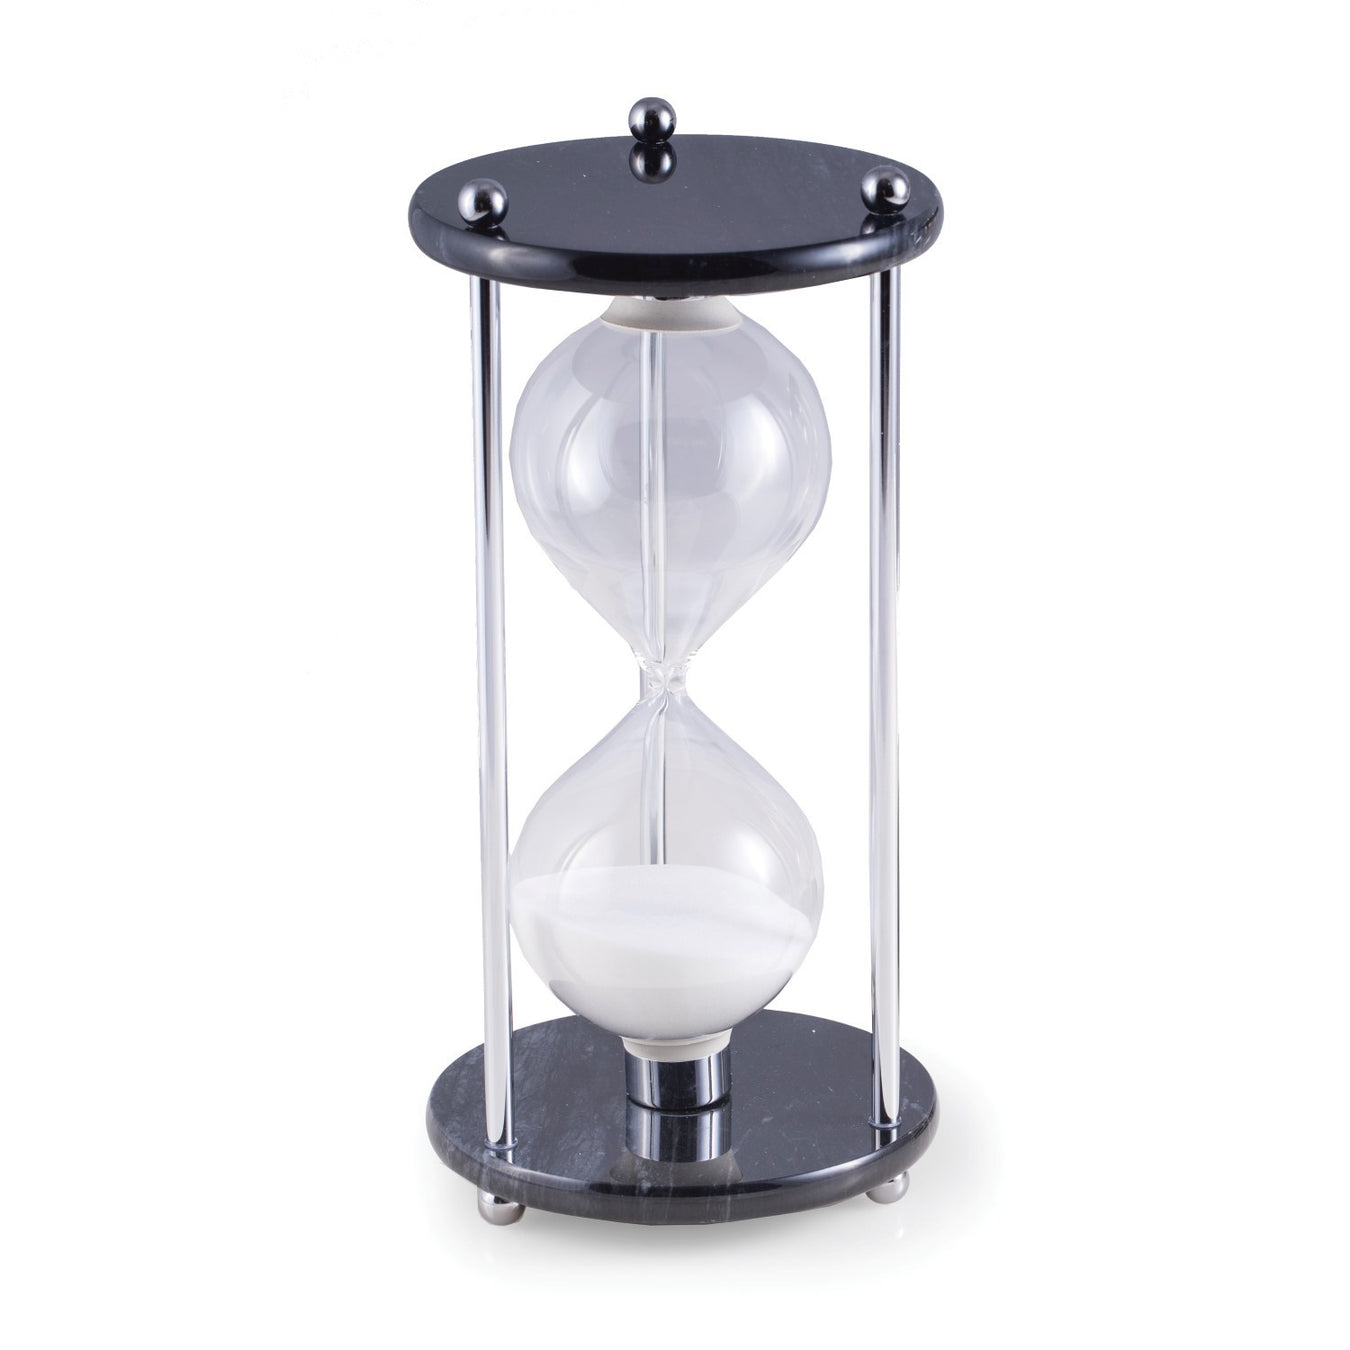 Hourglass & Sand Timers